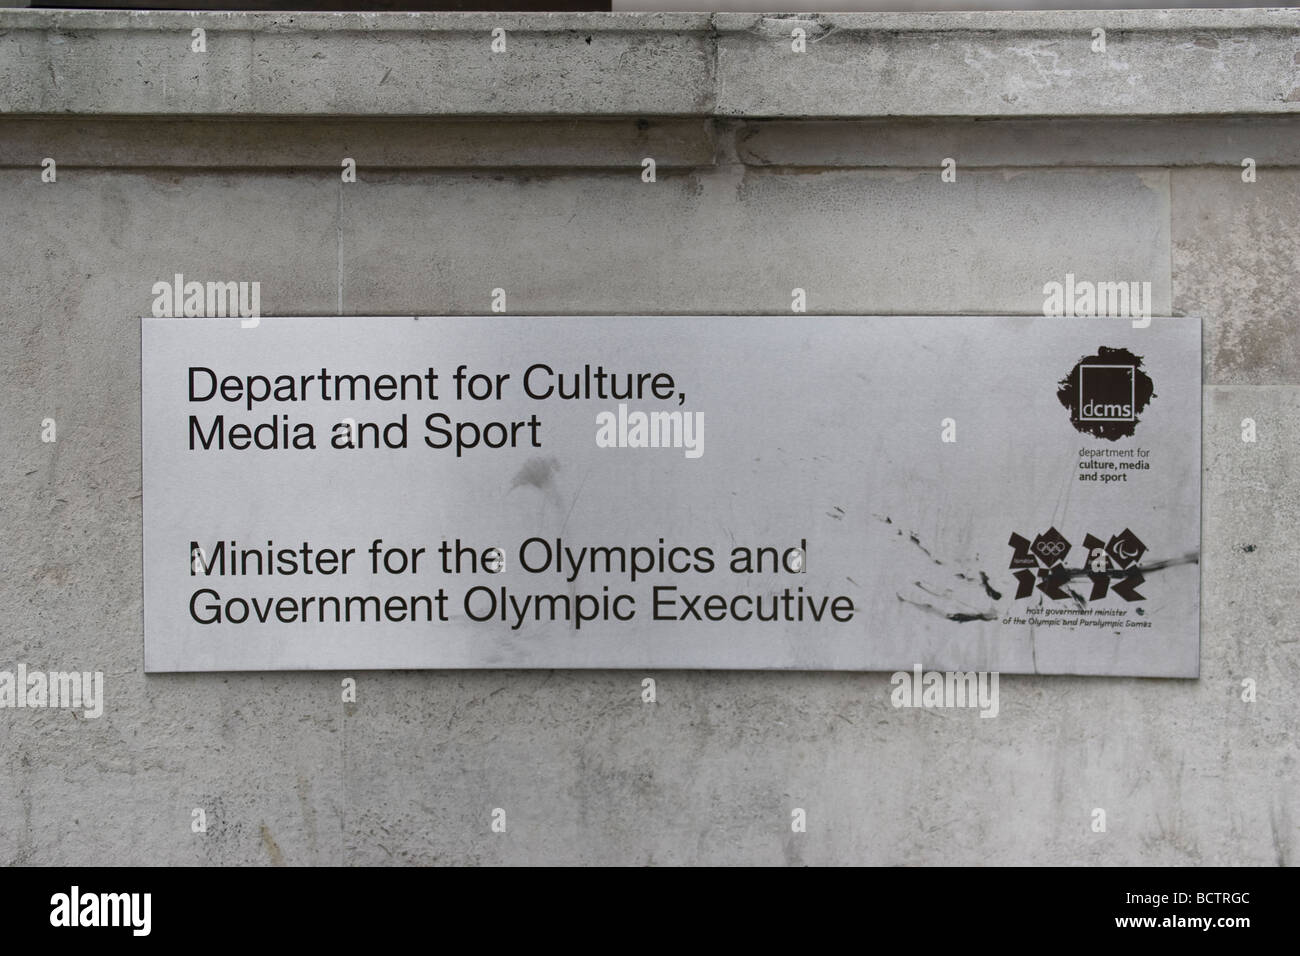 Department for Culture, Media and Sport Stock Photo